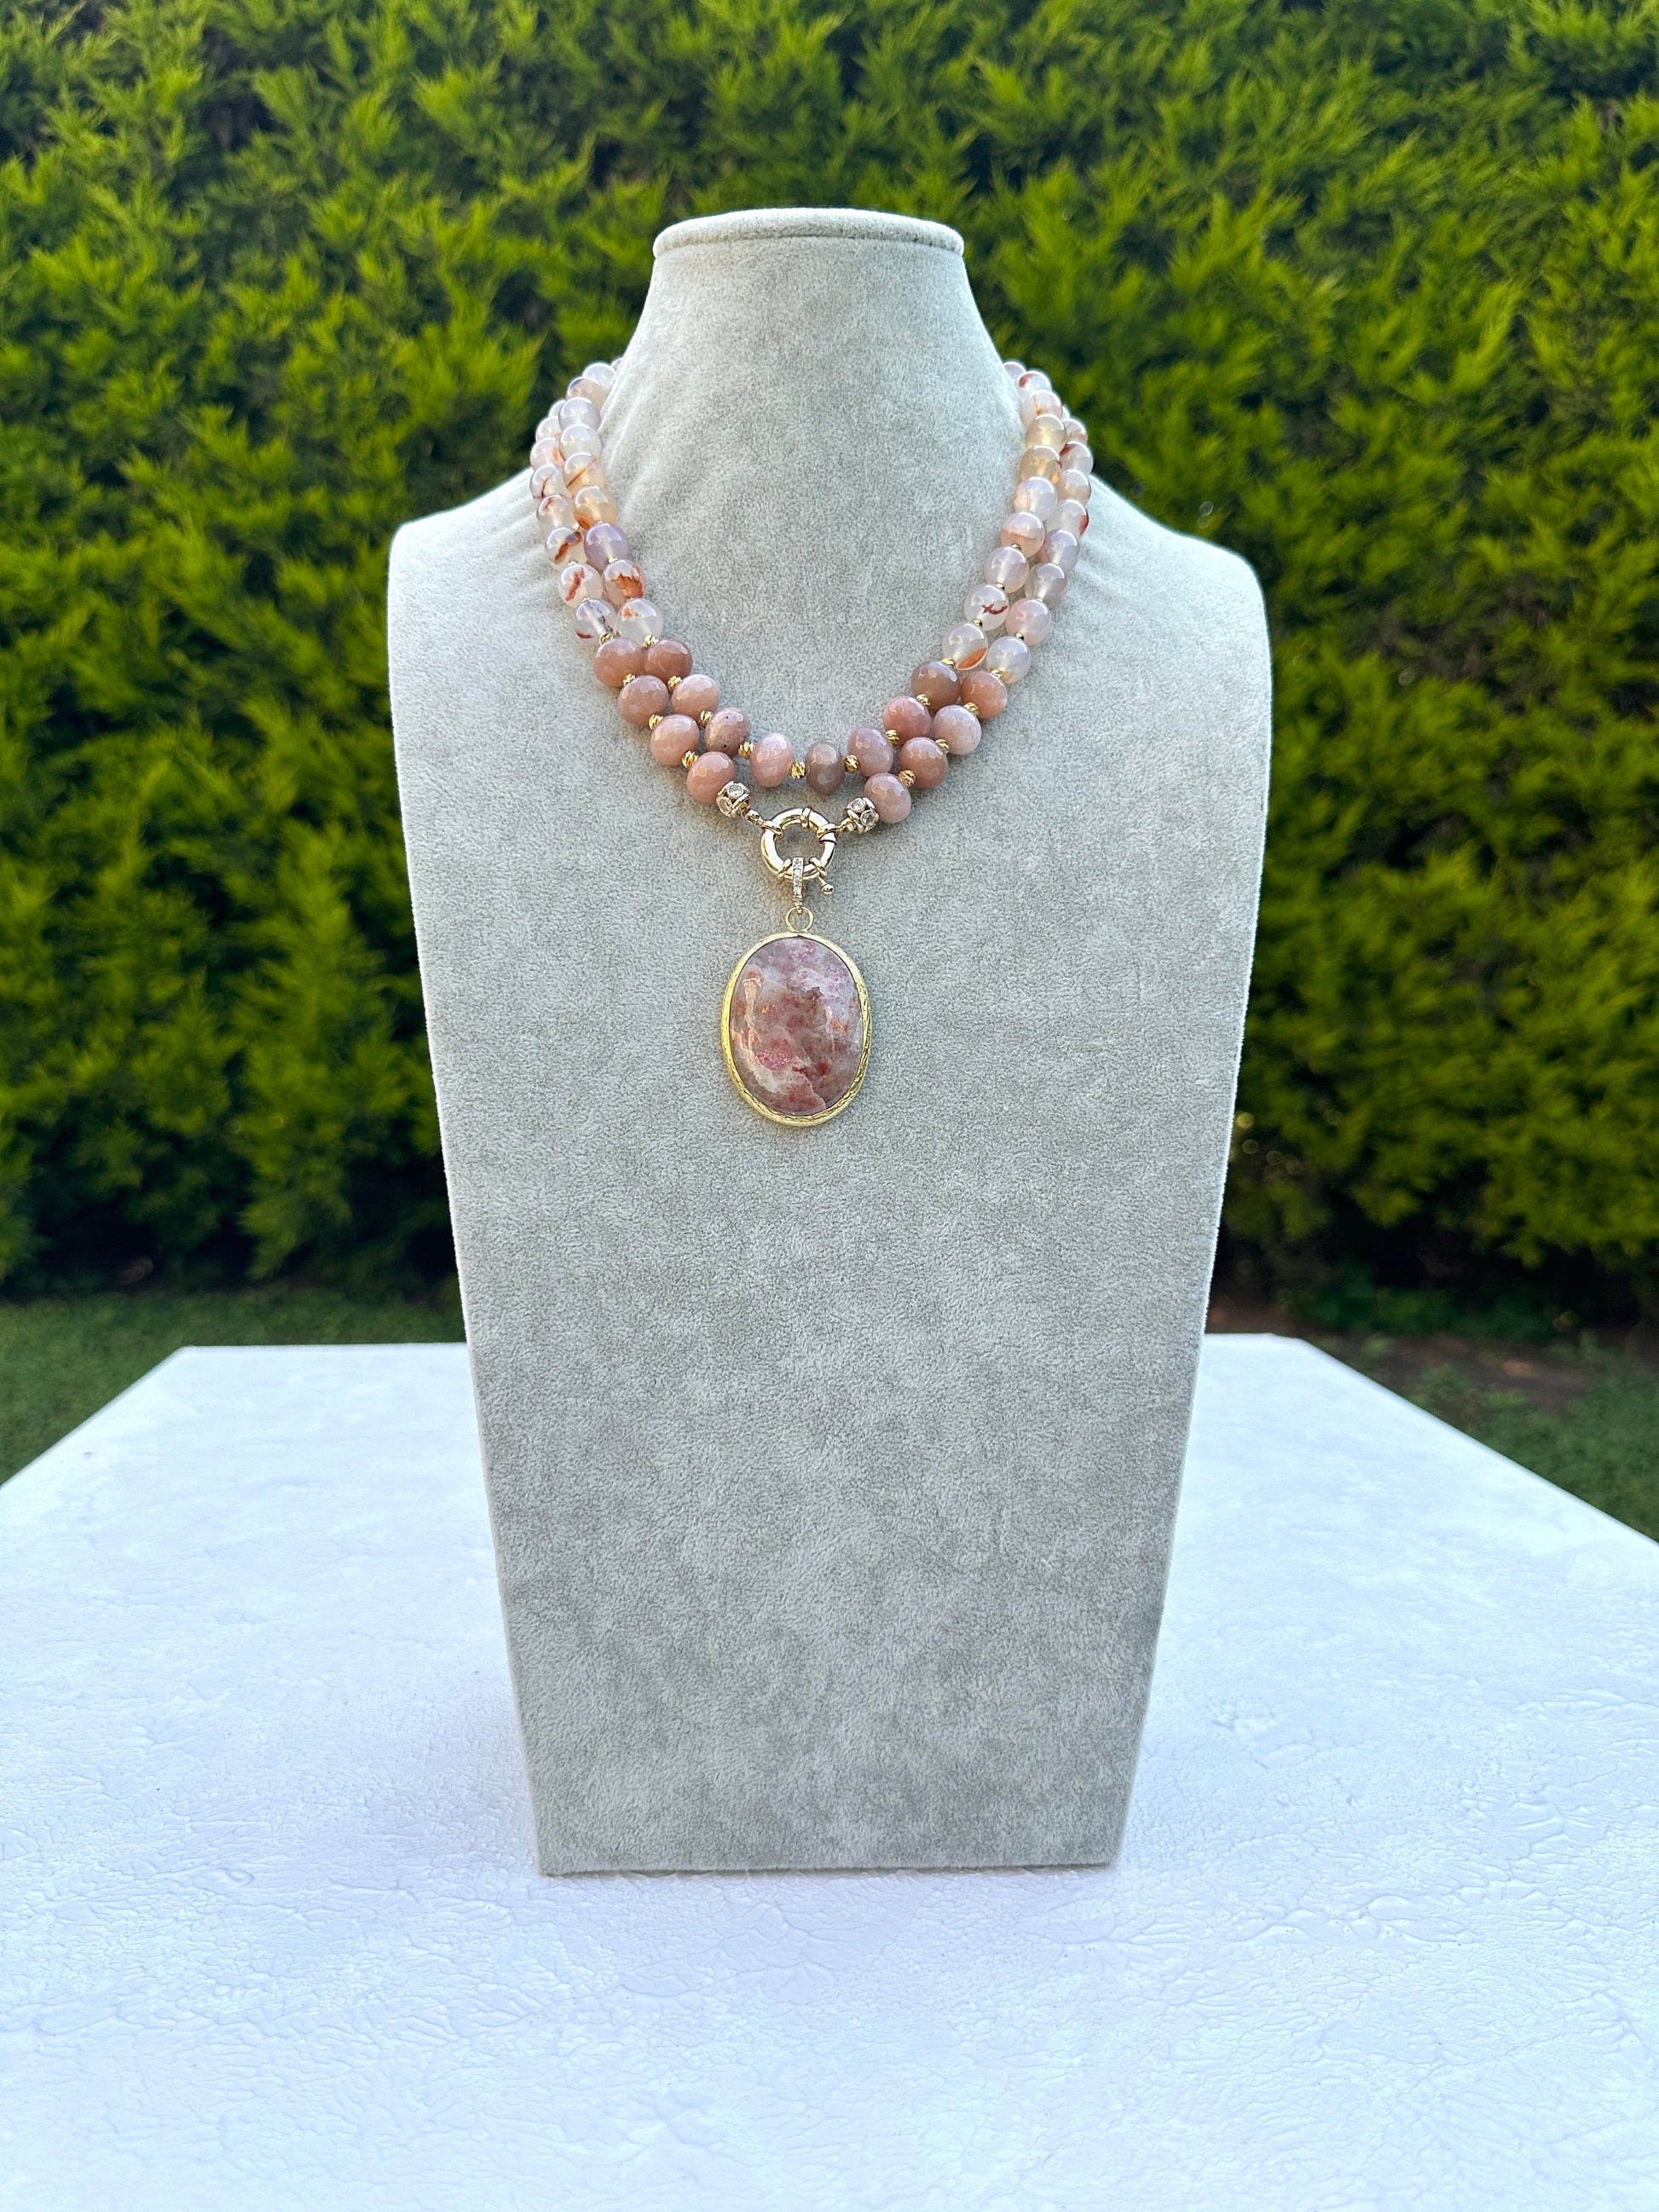 Agate Necklace, Handmade Sun Stone Jewelry, Unique Birthday Gift for Wife, Big Bold Statement Necklace, Summer Jewelry, Pink Gemstone Jewel